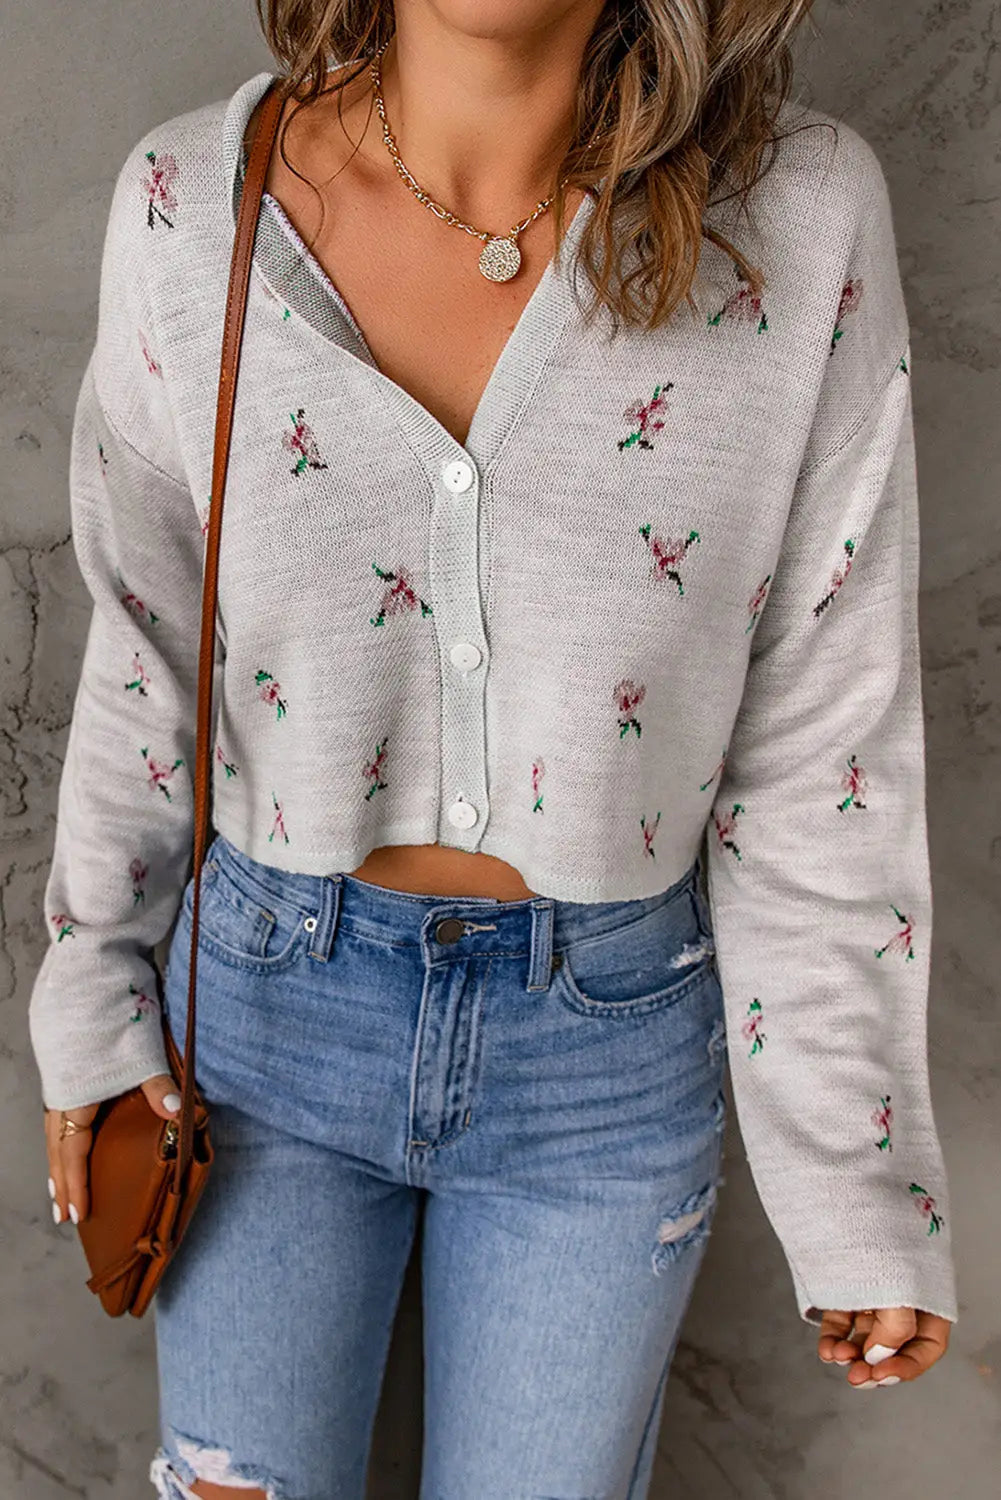 Gray floral cropped sweater cardigan - sweaters & cardigans